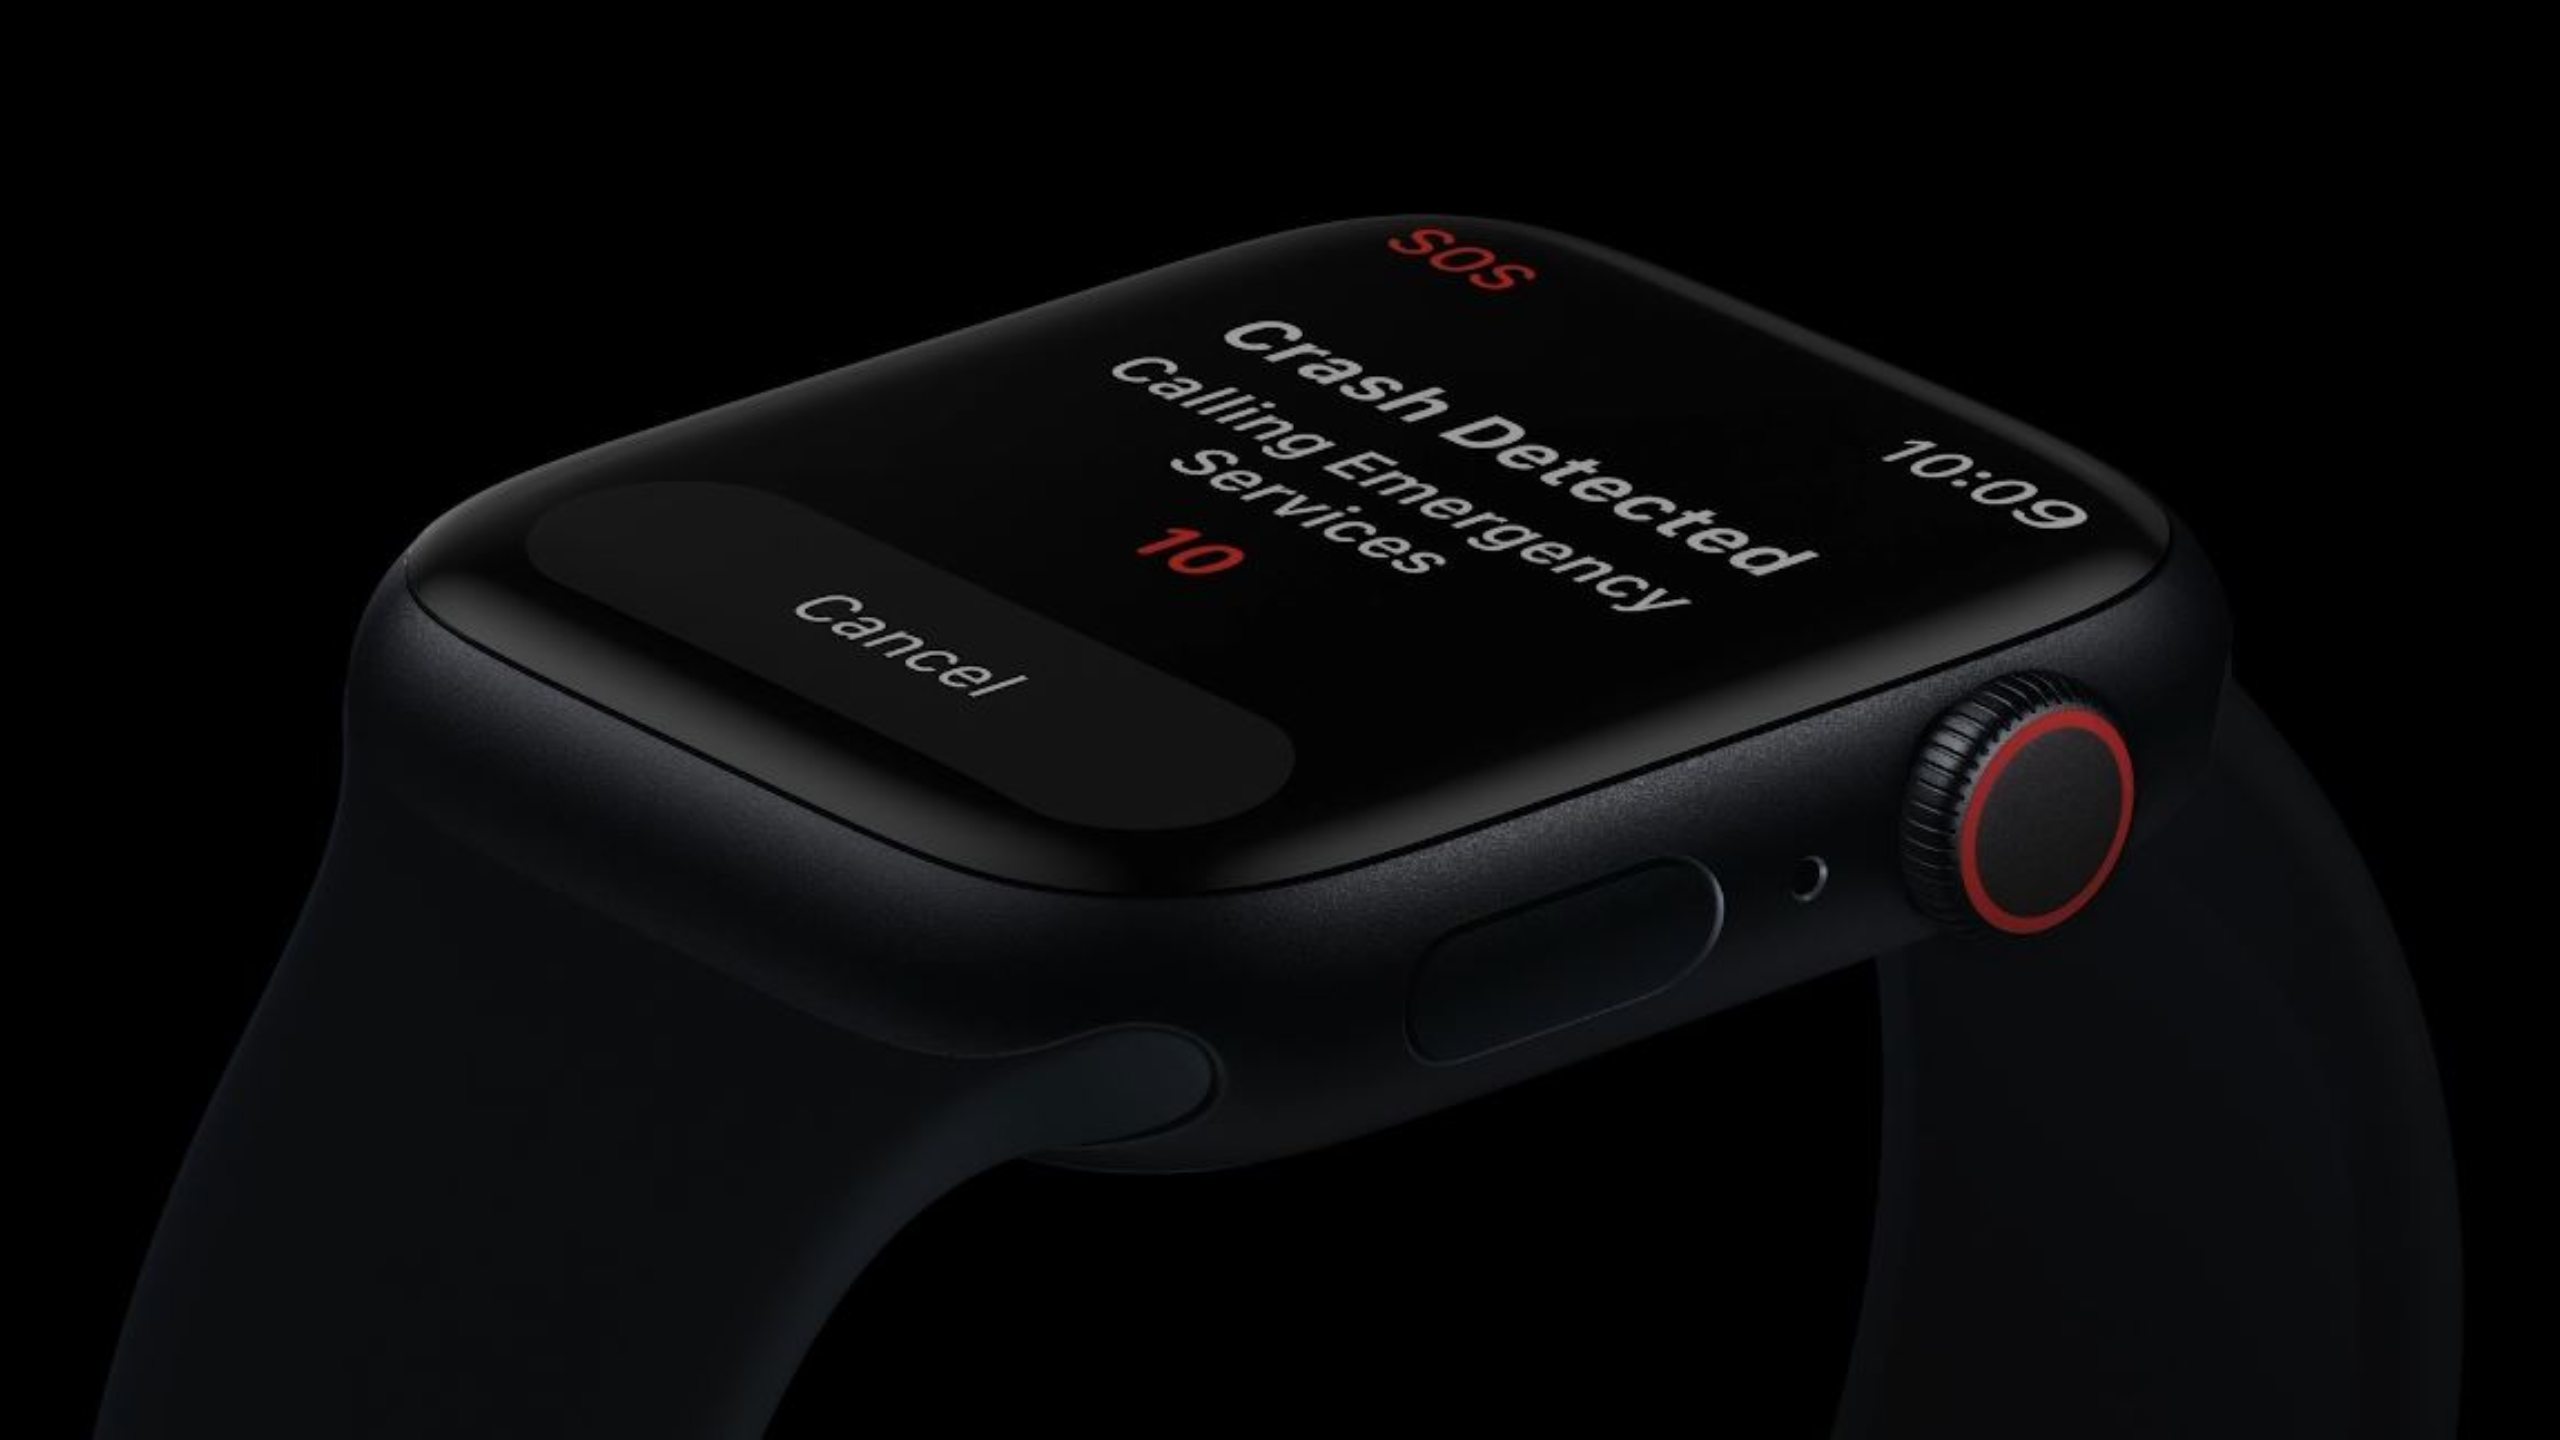 Apple Watch Crash Detection helped response team locate car accident in Germany